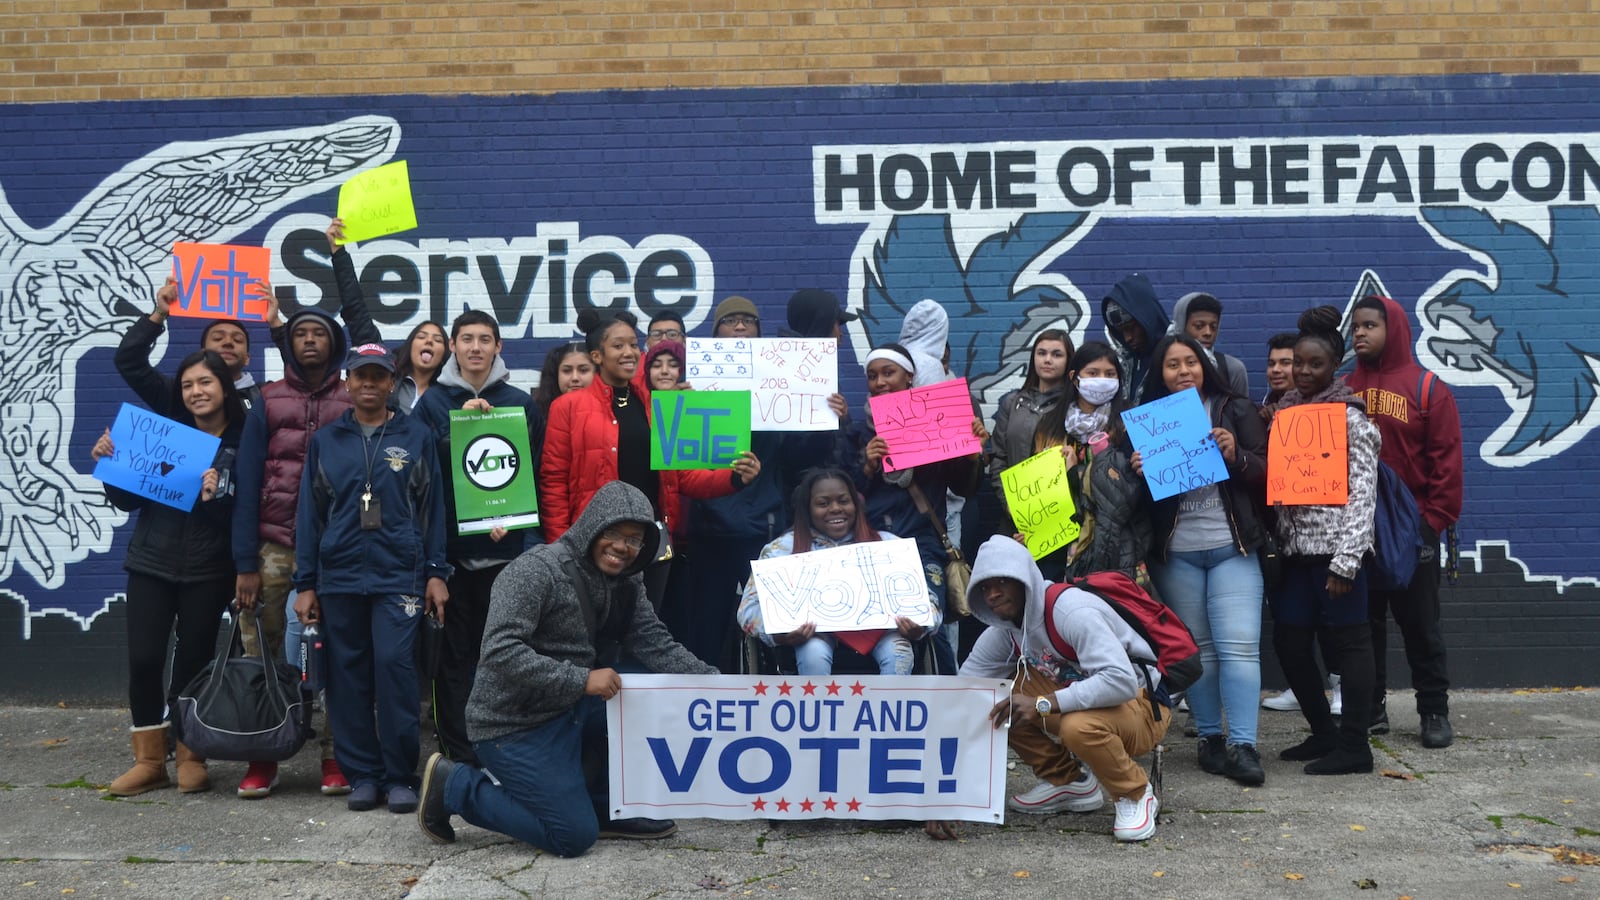 Students from Air Force Academy High School organized a voter registration drive for classmates eligible to vote and with counselors arranged a school-day march to the polls last fall to cast ballots in the governor’s race.